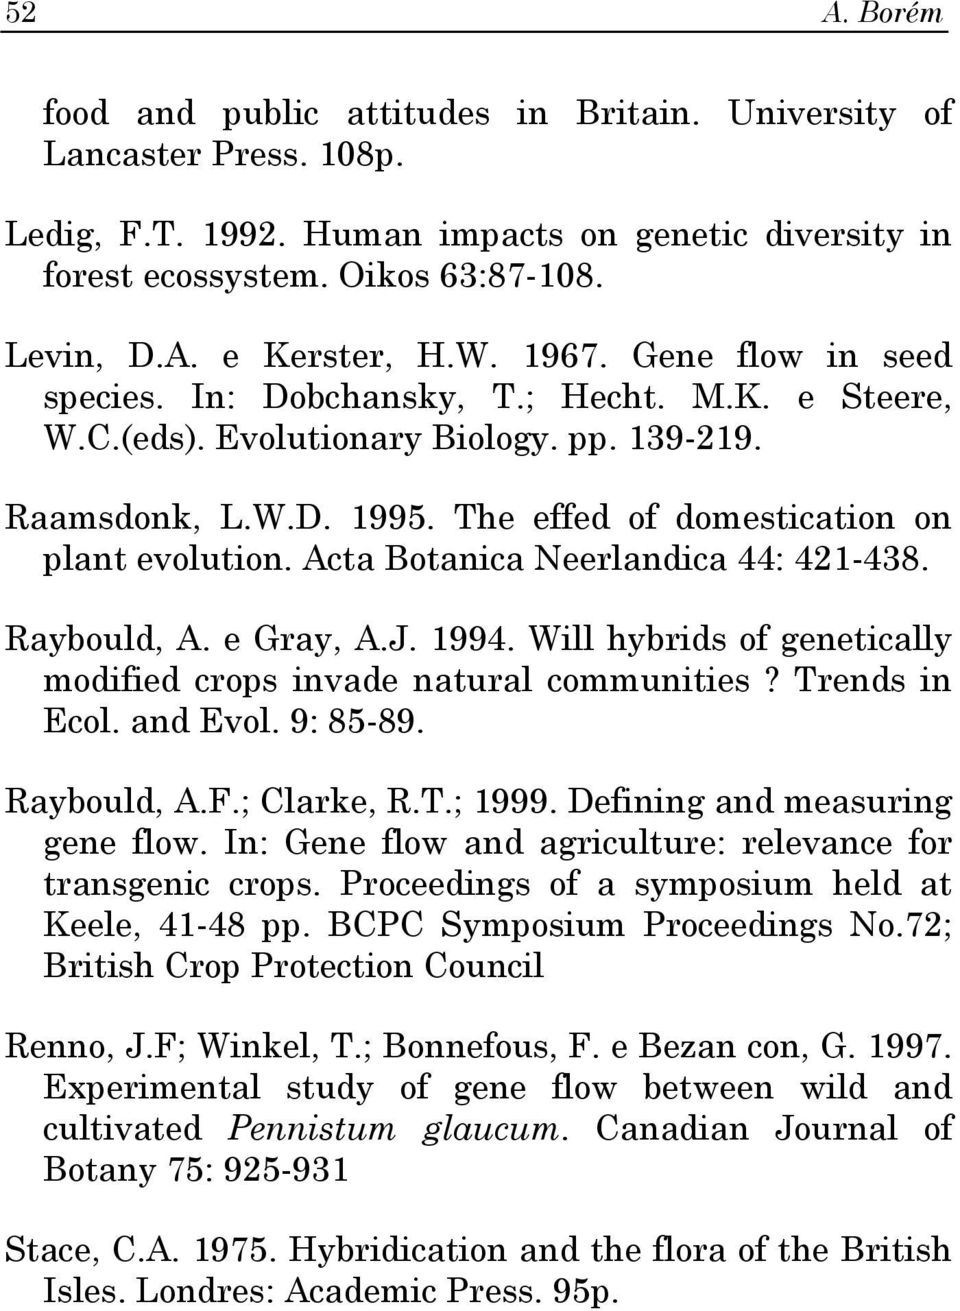 Acta Botanica Neerlandica 44: 421-438. Raybould, A. e Gray, A.J. 1994. Will hybrids of genetically modified crops invade natural communities? Trends in Ecol. and Evol. 9: 85-89. Raybould, A.F.